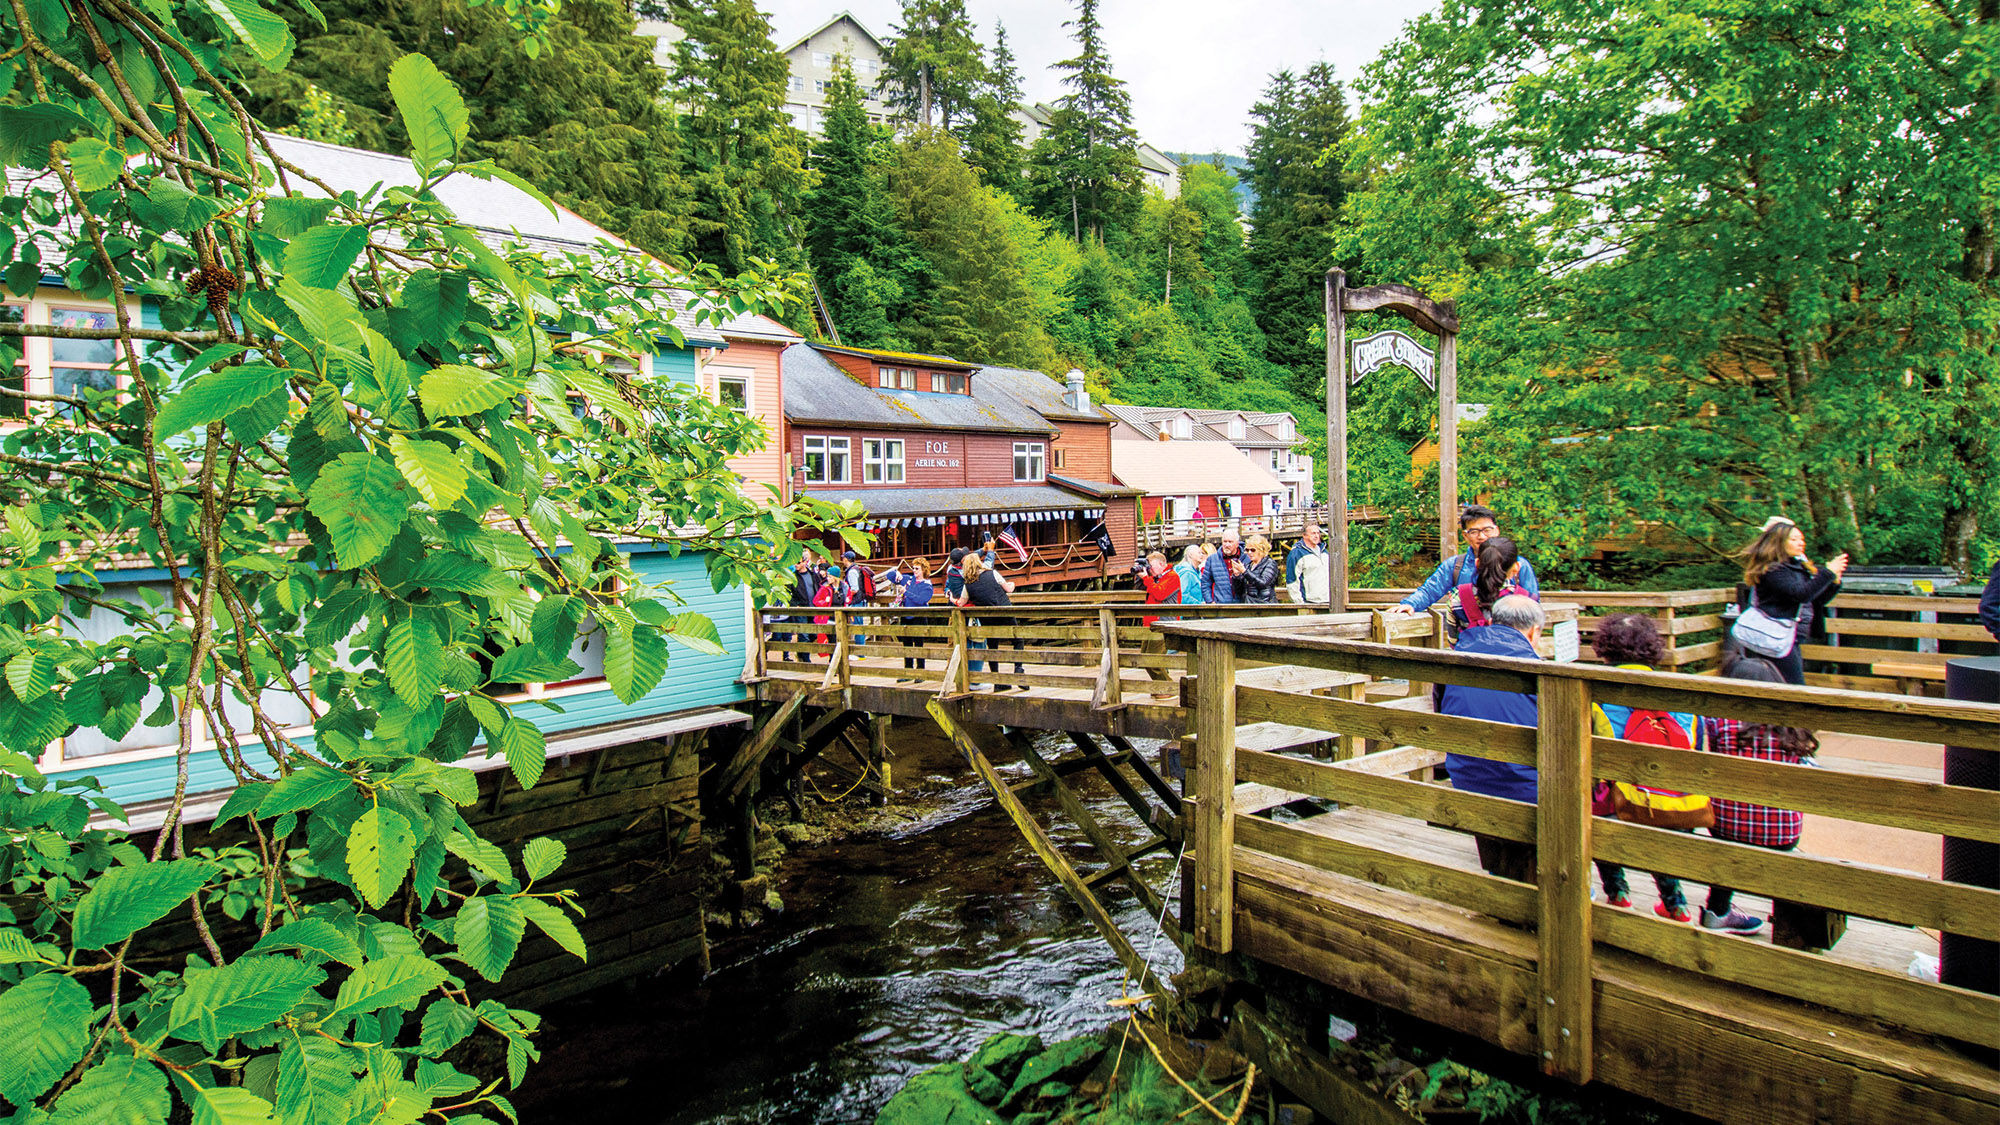 The Totem Heritage Center, Tongass Historical Museum and Creek Street are some of the stops on the Ketchikan Salmon Walk, a new 1.5-mile, self-guided sightseeing path.